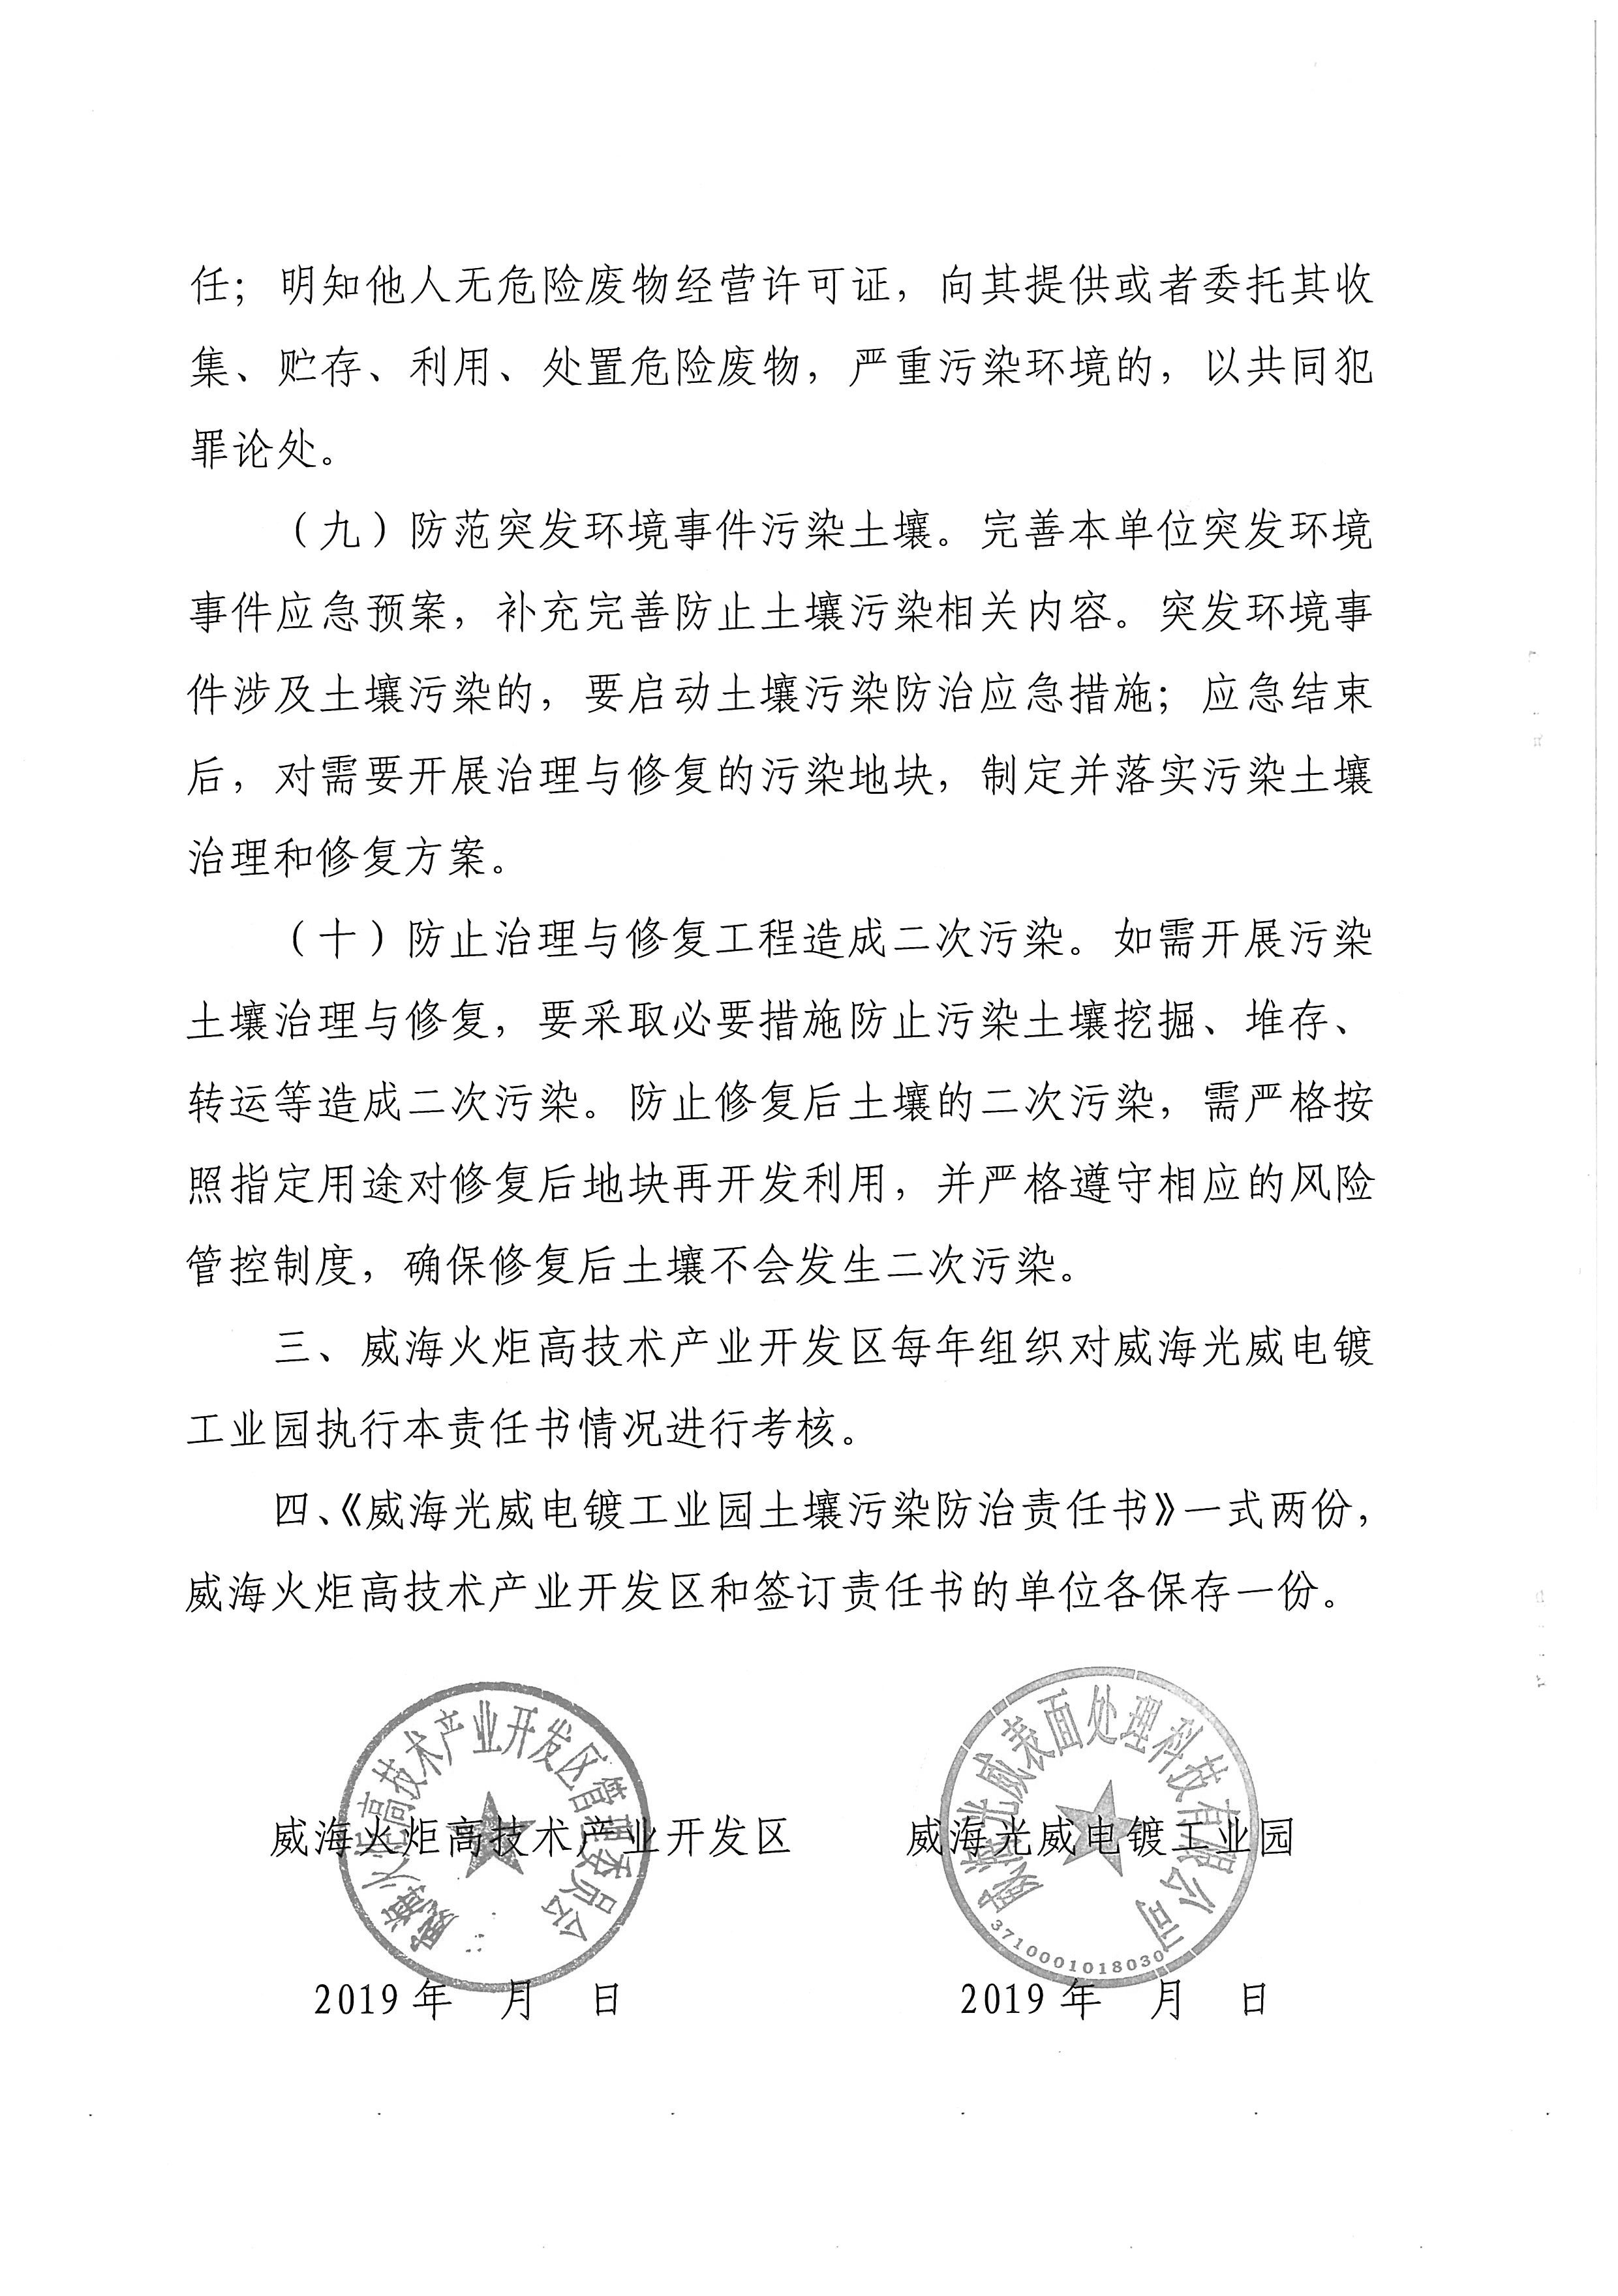 Public Notice | Guangwei Electroplating Garden Soil Pollution Prevention and Control Responsibility Letter